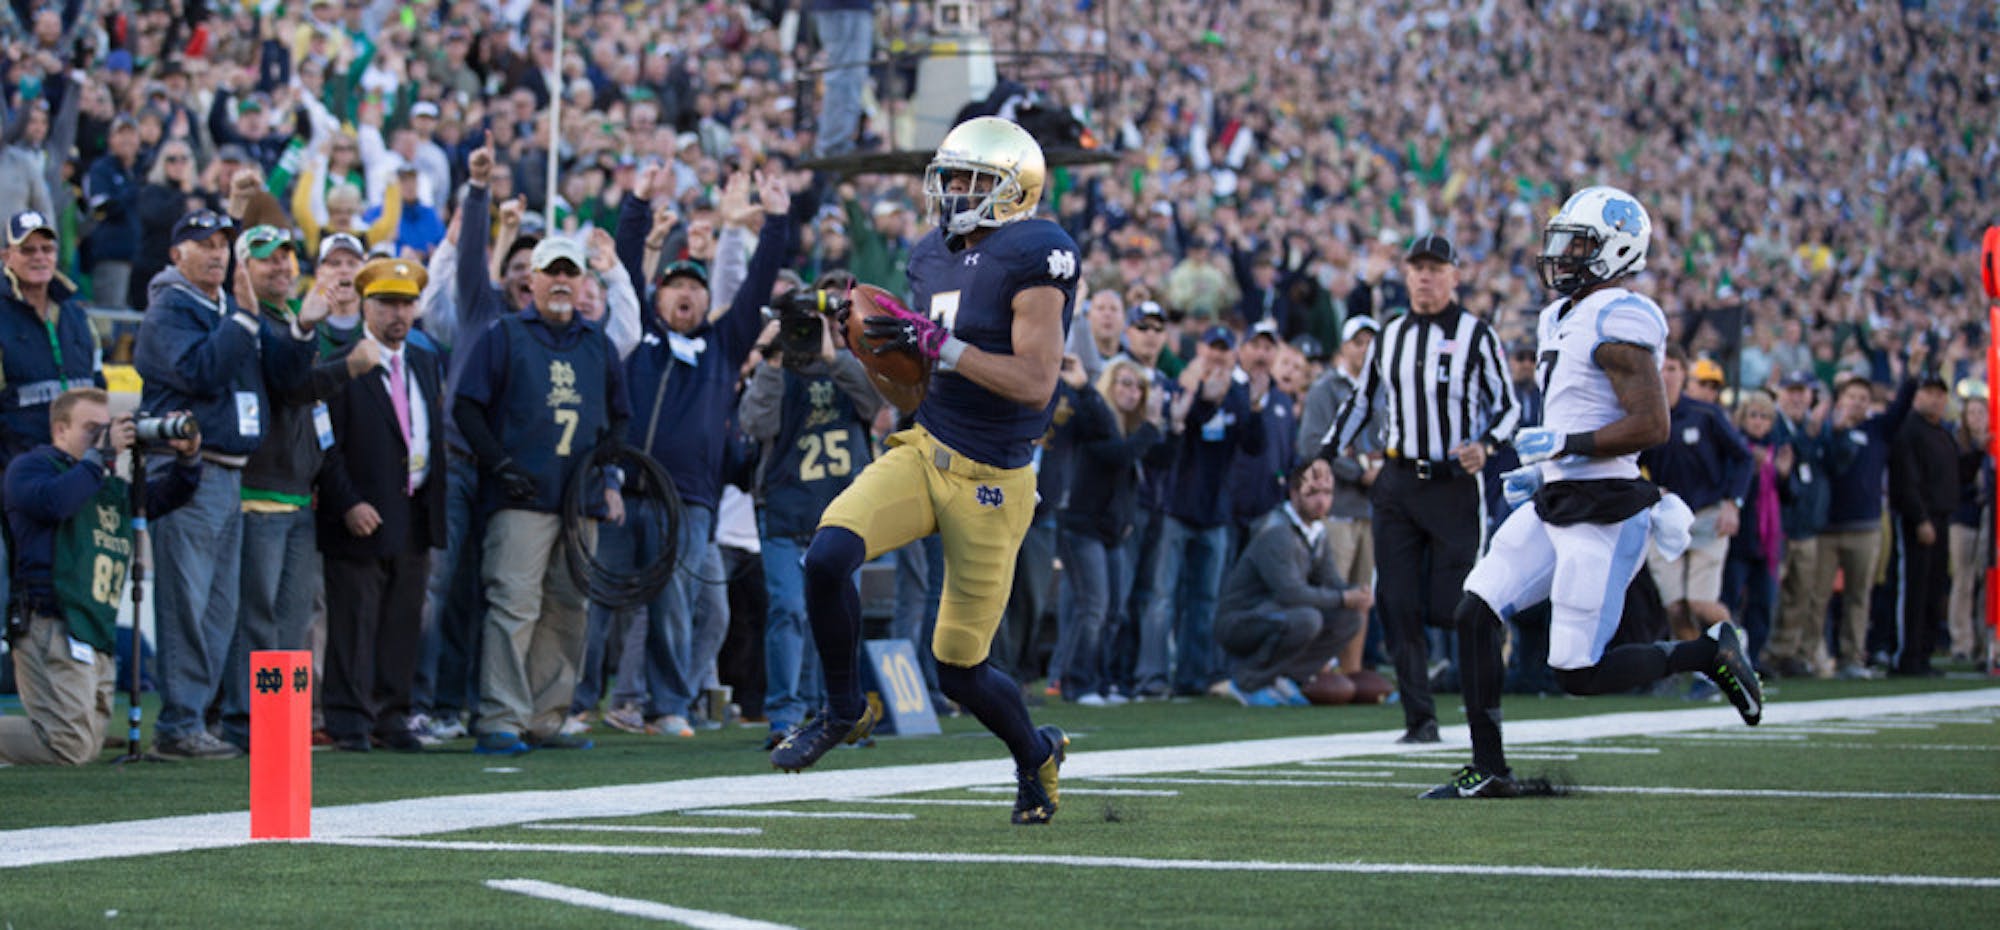 Irish sophomore receiver Will Fuller hauled in seven receptions for 133 yards and two touchdowns during Notre Dame’s 50-43 win over North Carolina on Saturday at Notre Dame Stadium.